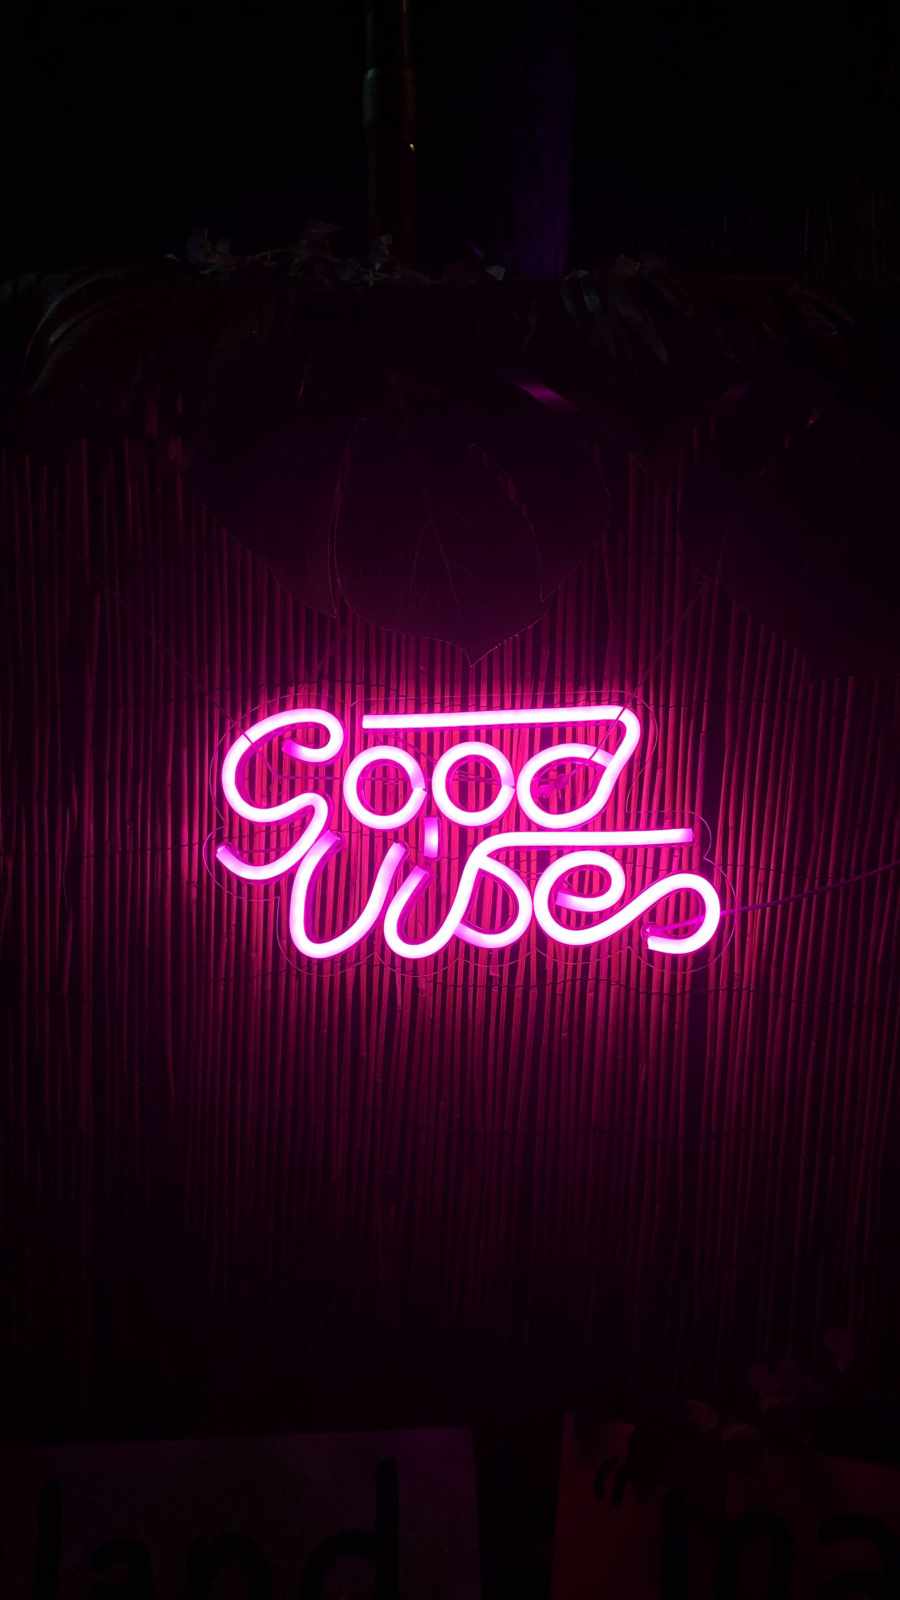 Only Good Vibes IPhone Wallpaper - IPhone Wallpapers : iPhone Wallpapers